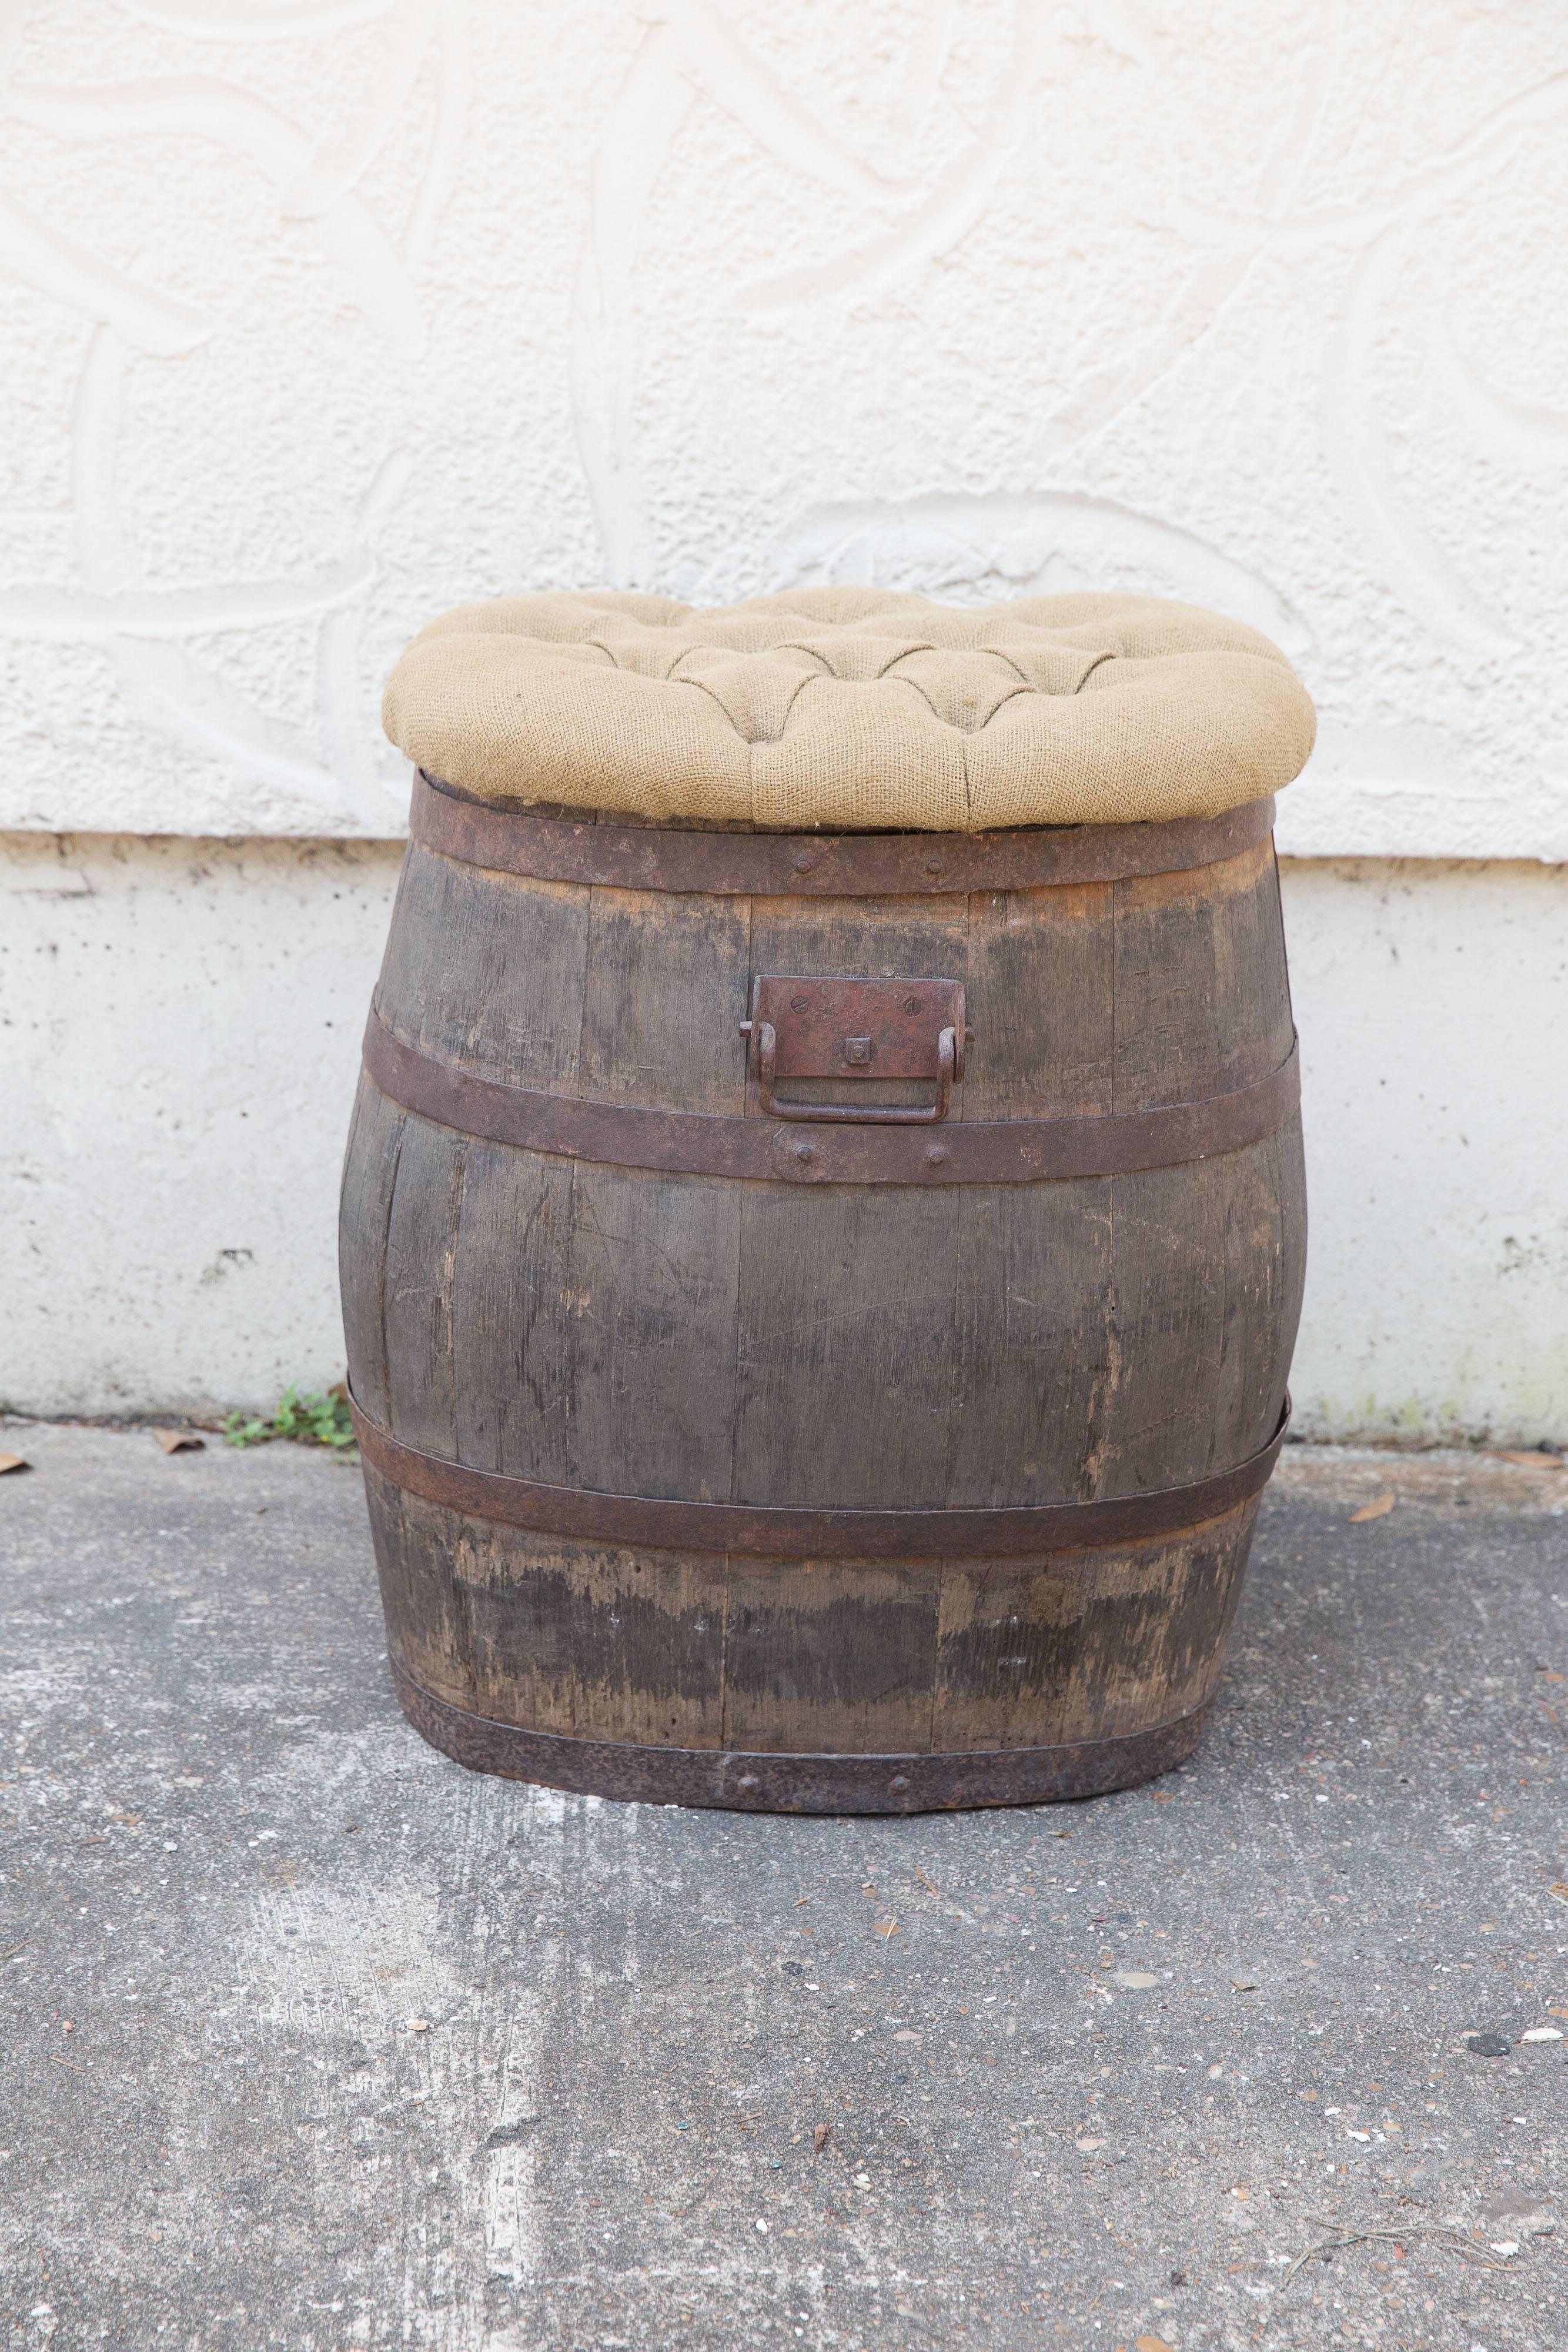 An old oak whiskey barrel from France has been re-purposed into a handy stool with the addition of a hinged lid covered with tufted burlap. The name E.Roulleau can be seen on the side of the barrel. Extra seating / extra storage.